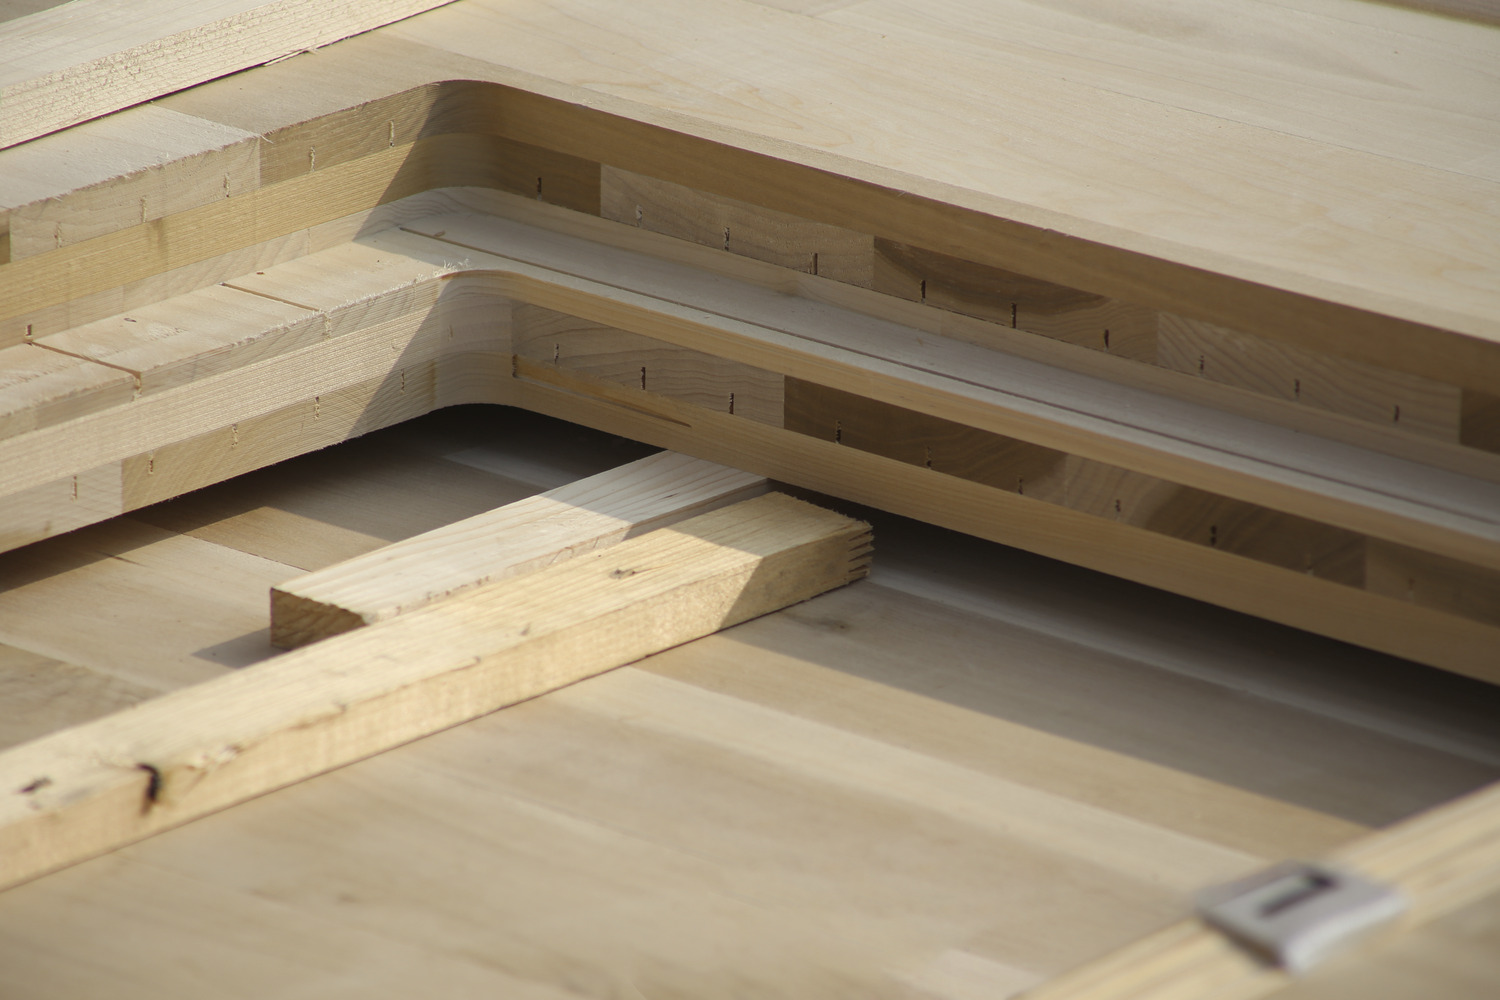 Materials such as CLT are key to mass timber adoption